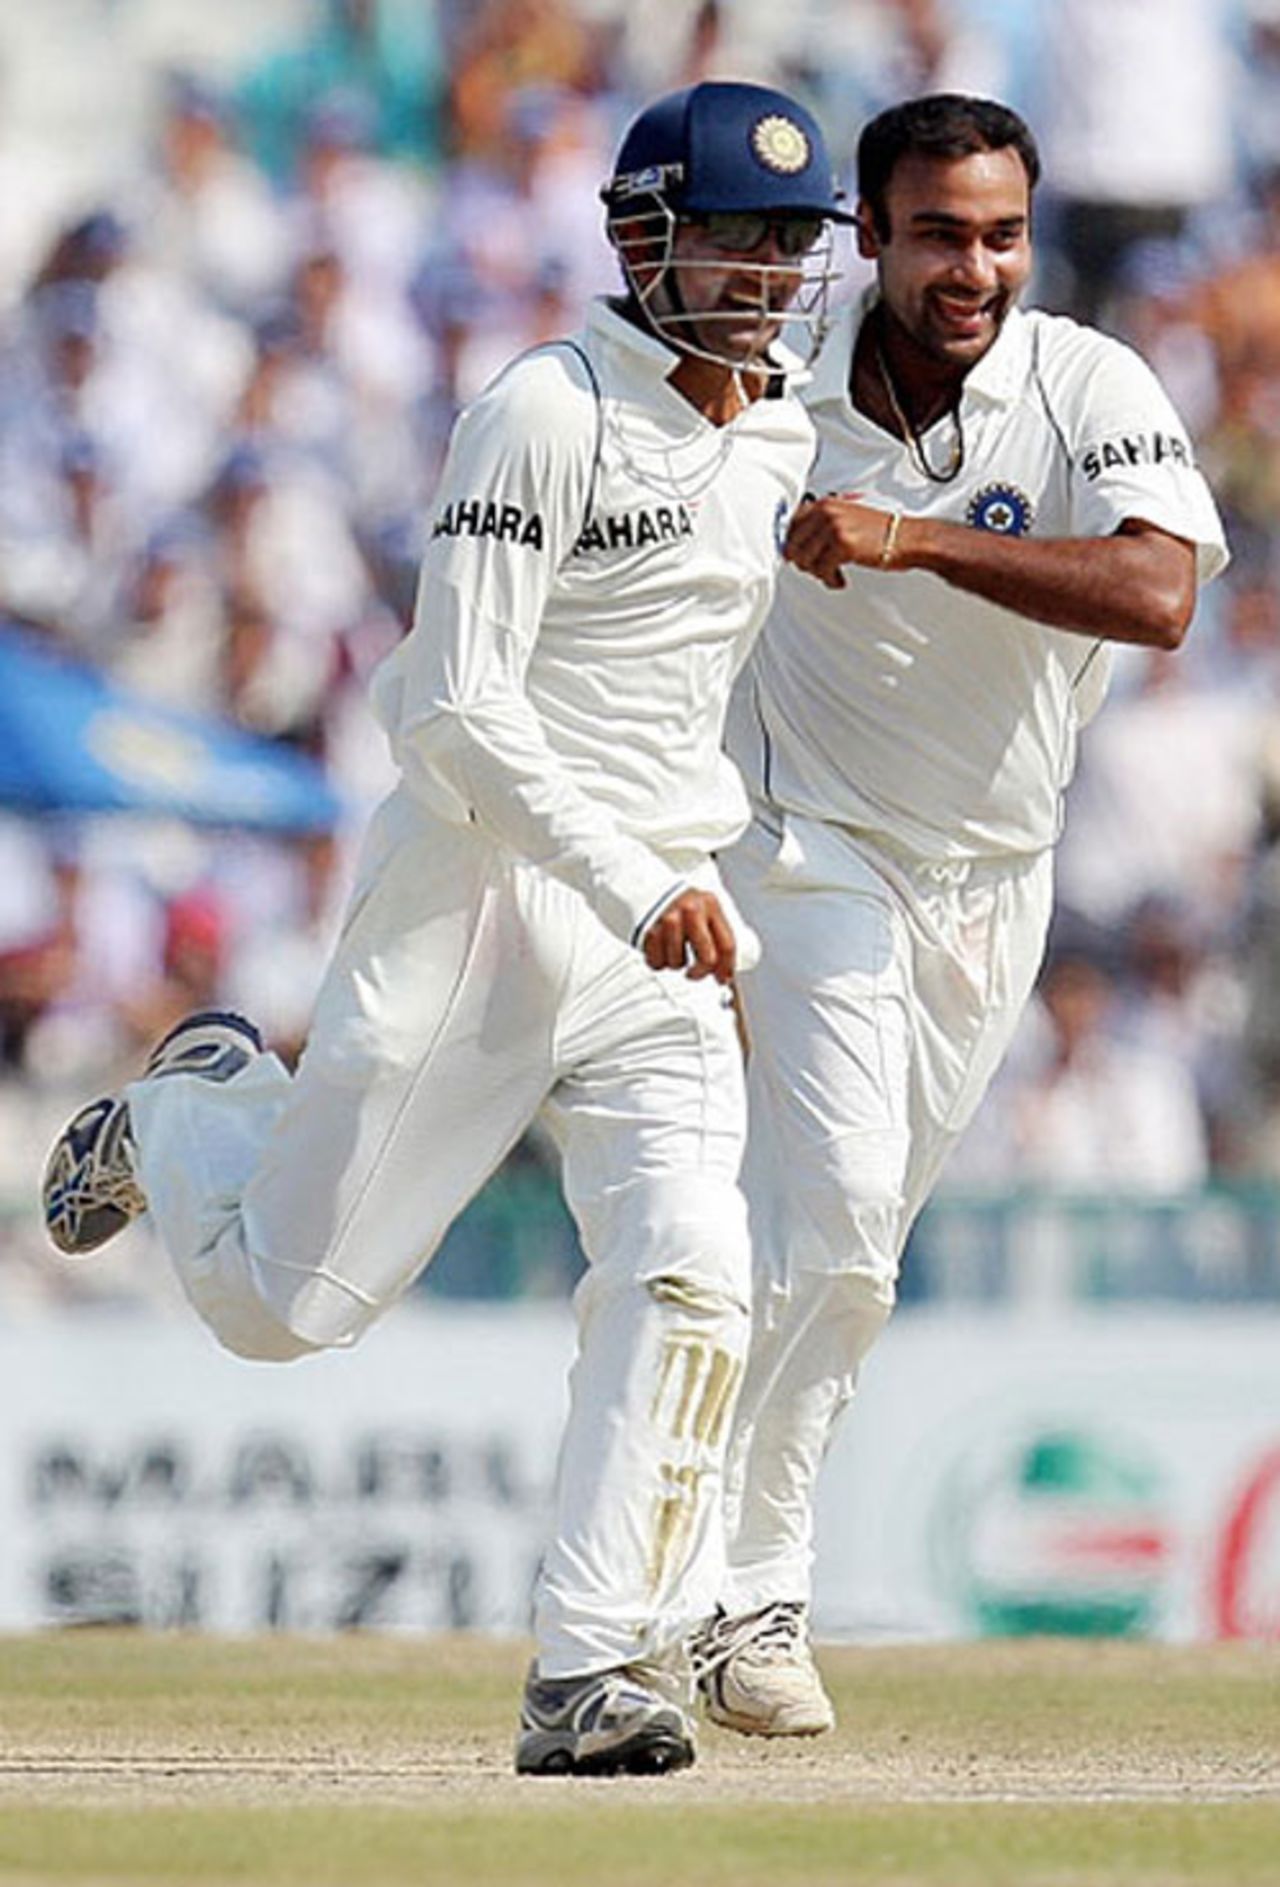 Amit Mishra and Gautam Gambhir run to grab the stumps after the fall of the last Australian wicket, India v Australia, 2nd Test, Mohali, 5th day, October 21, 2008